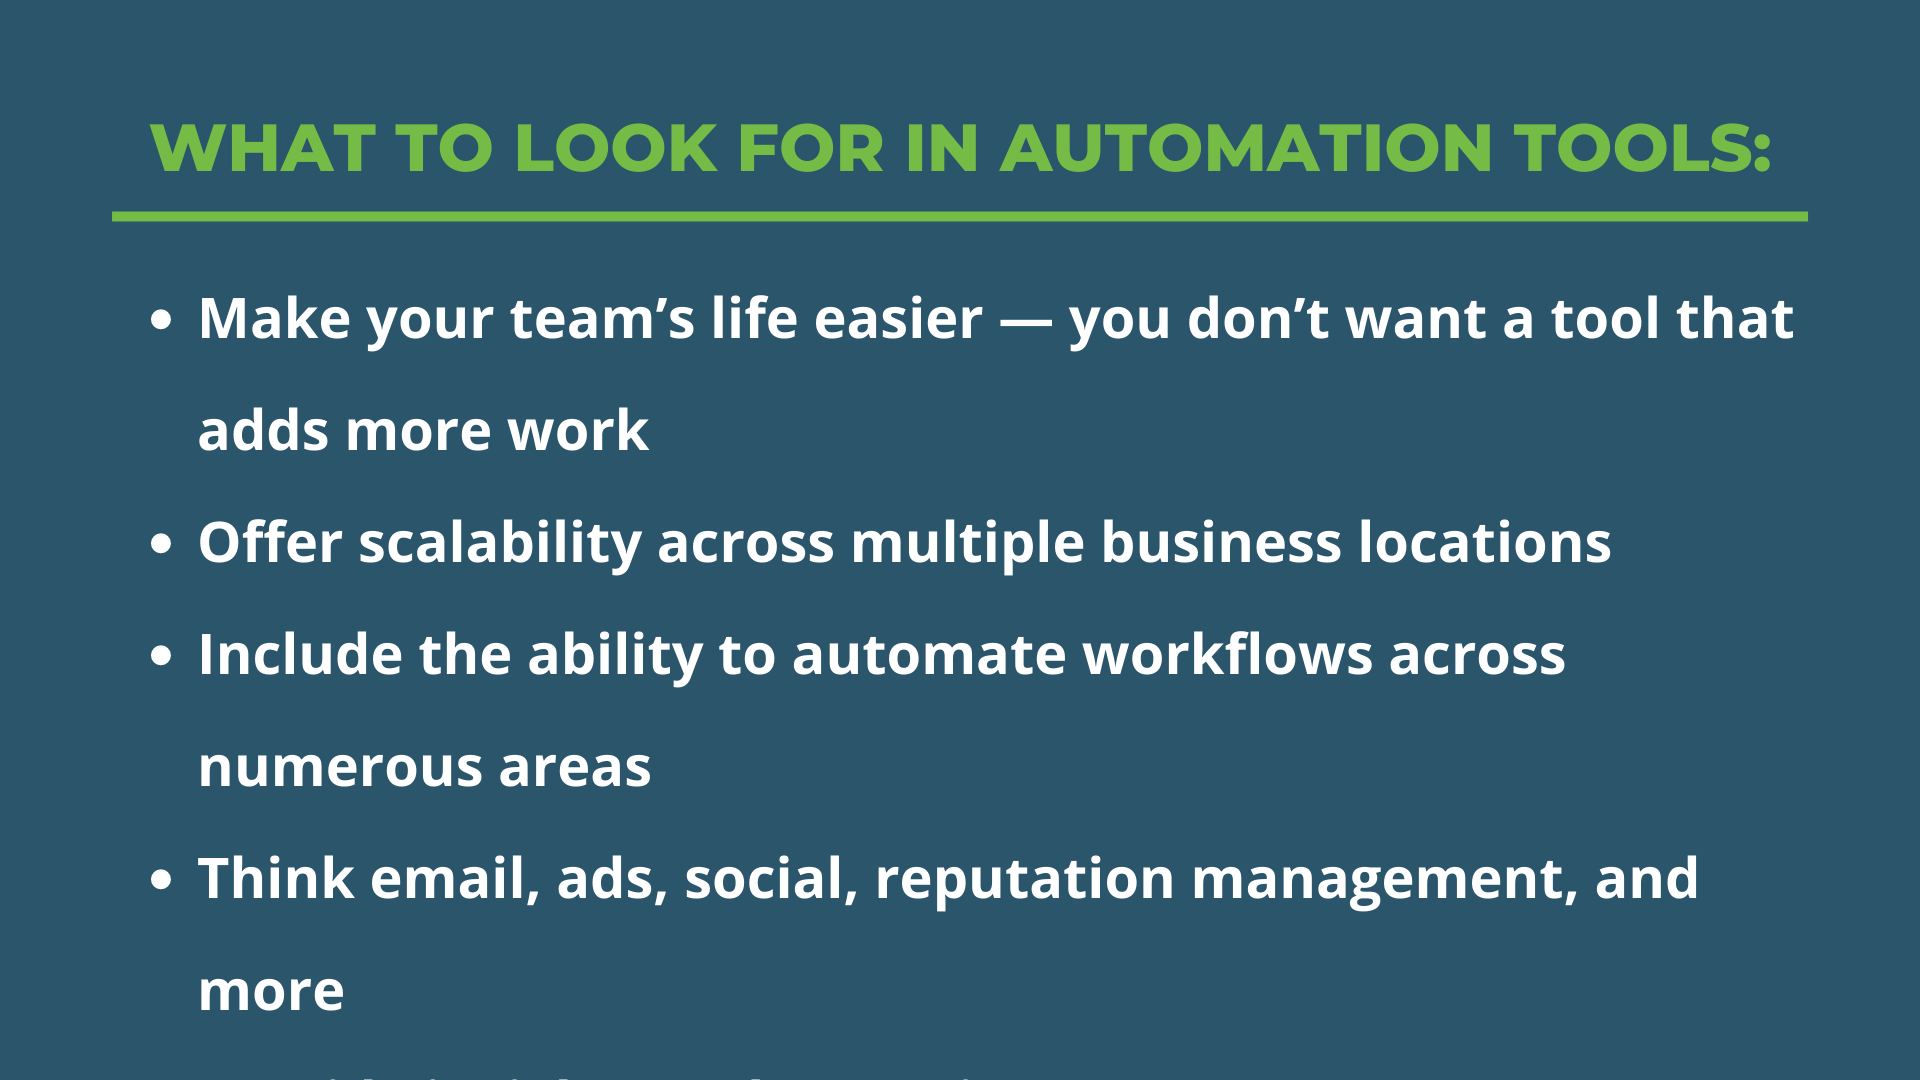 A dark blue background with green and white text highlighting what to look for when choosing an automation tool